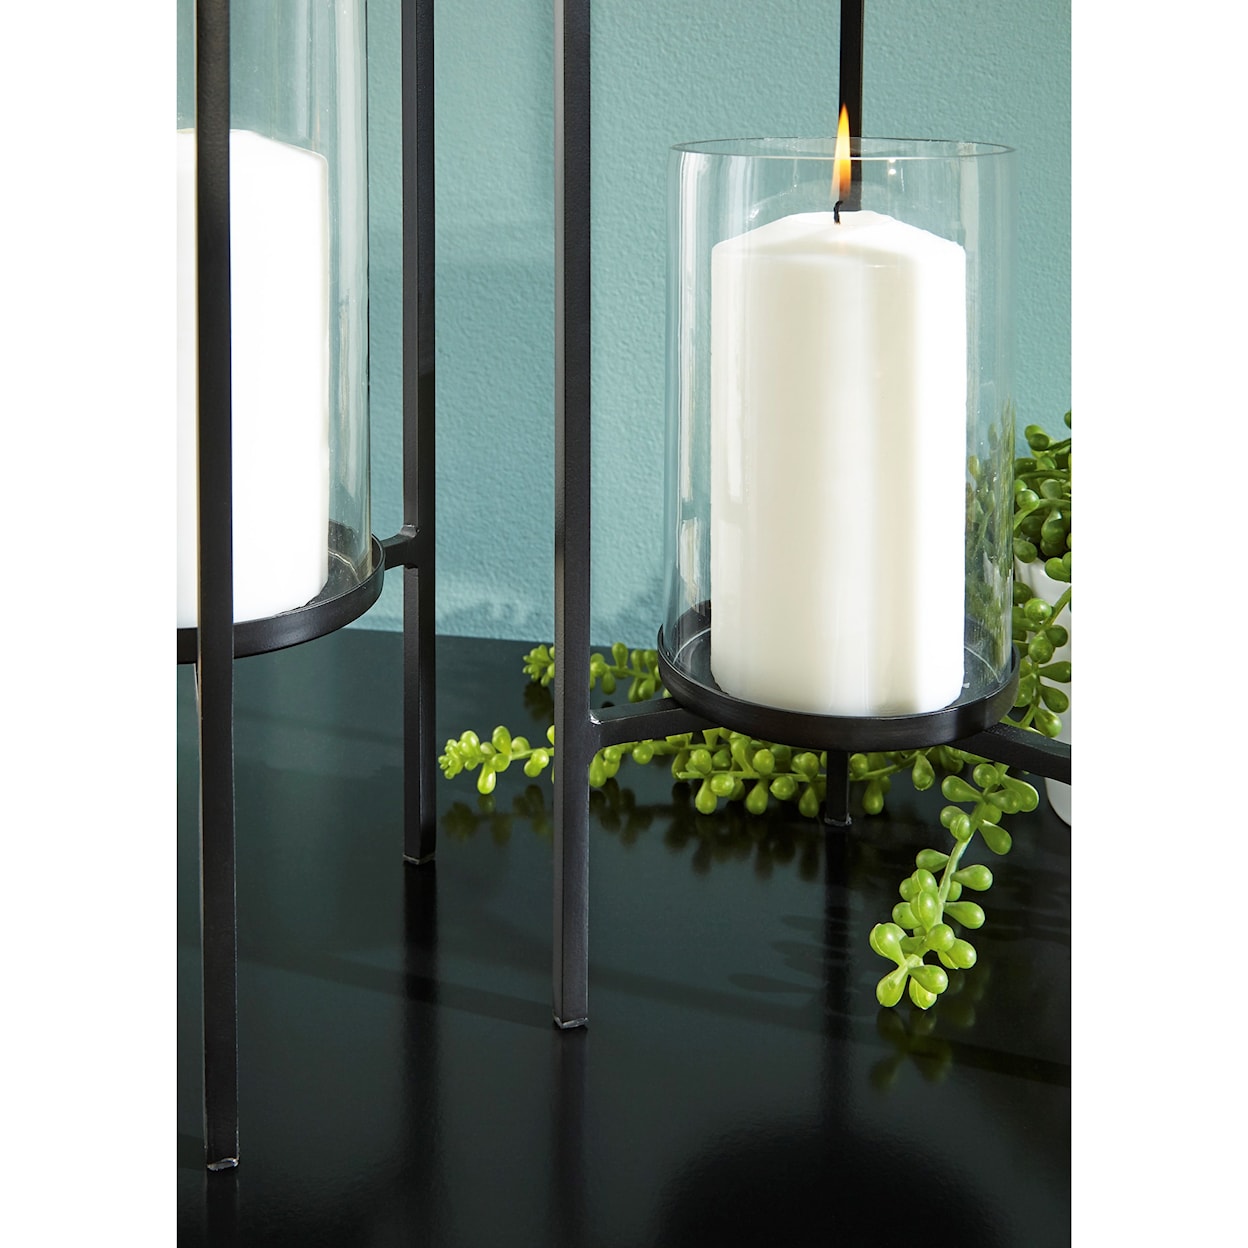 Michael Alan Select Accents Ginette Candle Holder (Set of 2)